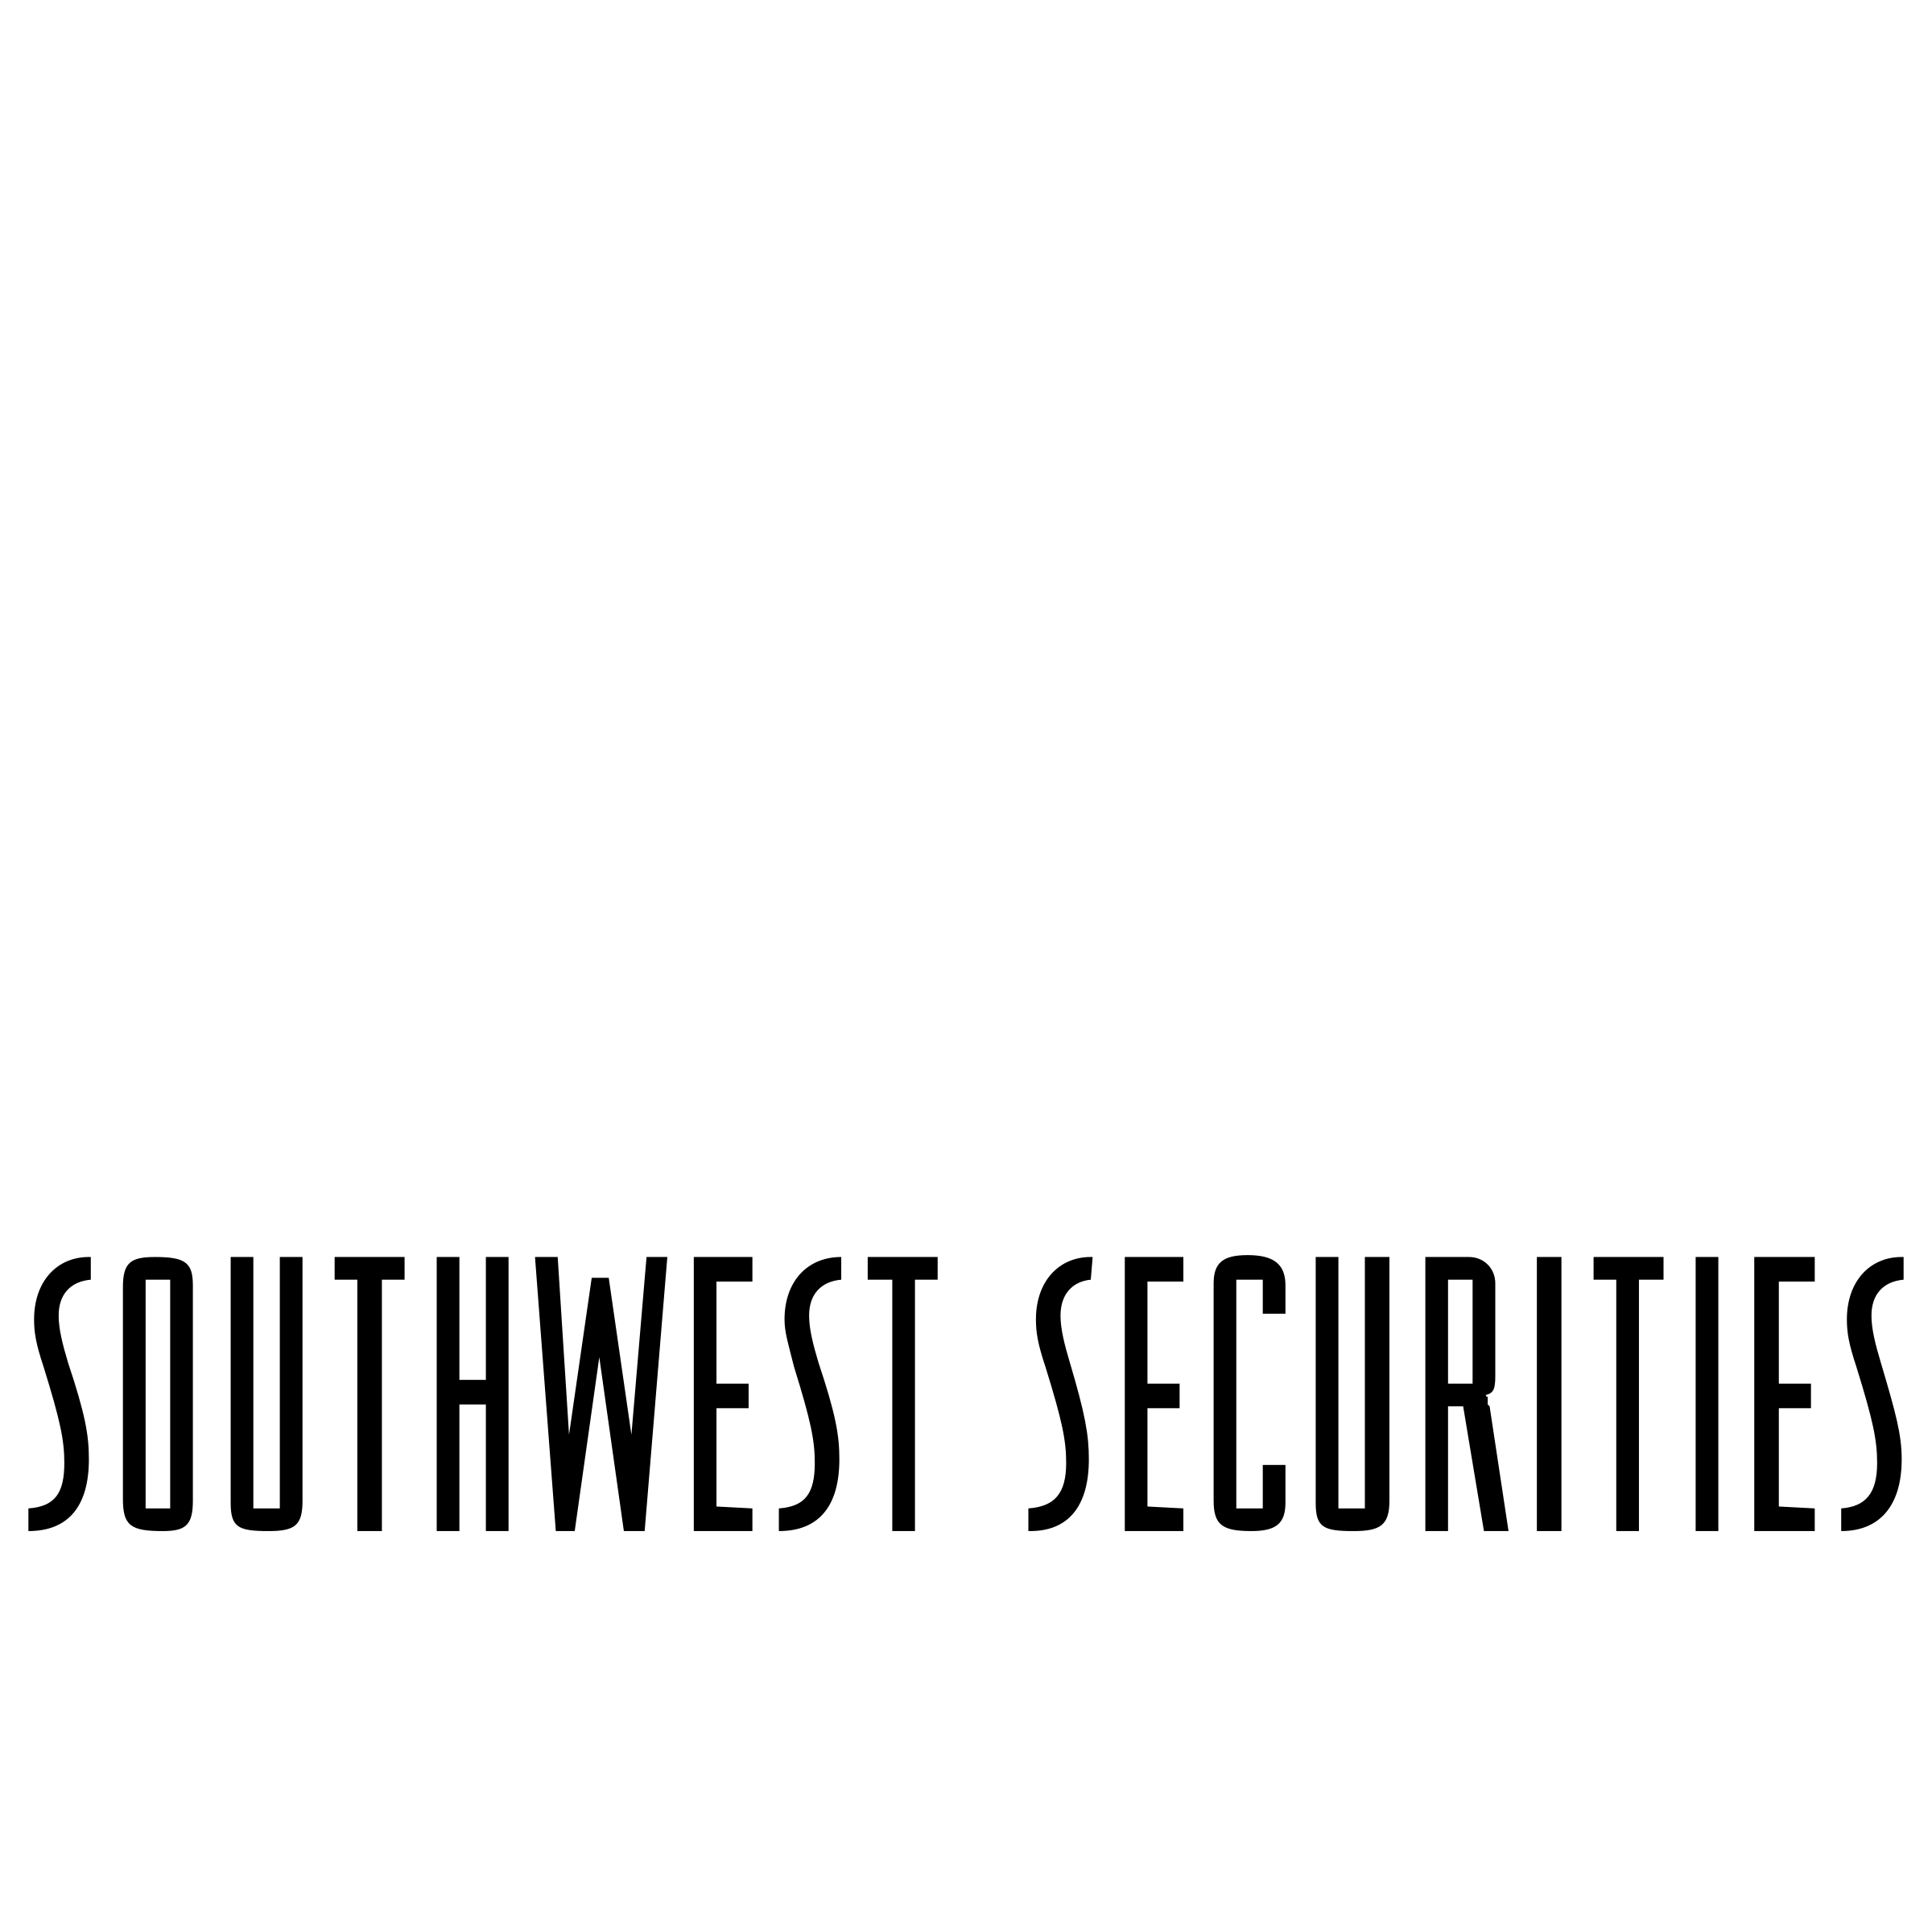 South West Securities Logo - Southwest Securities Logo PNG Transparent & SVG Vector - Freebie Supply